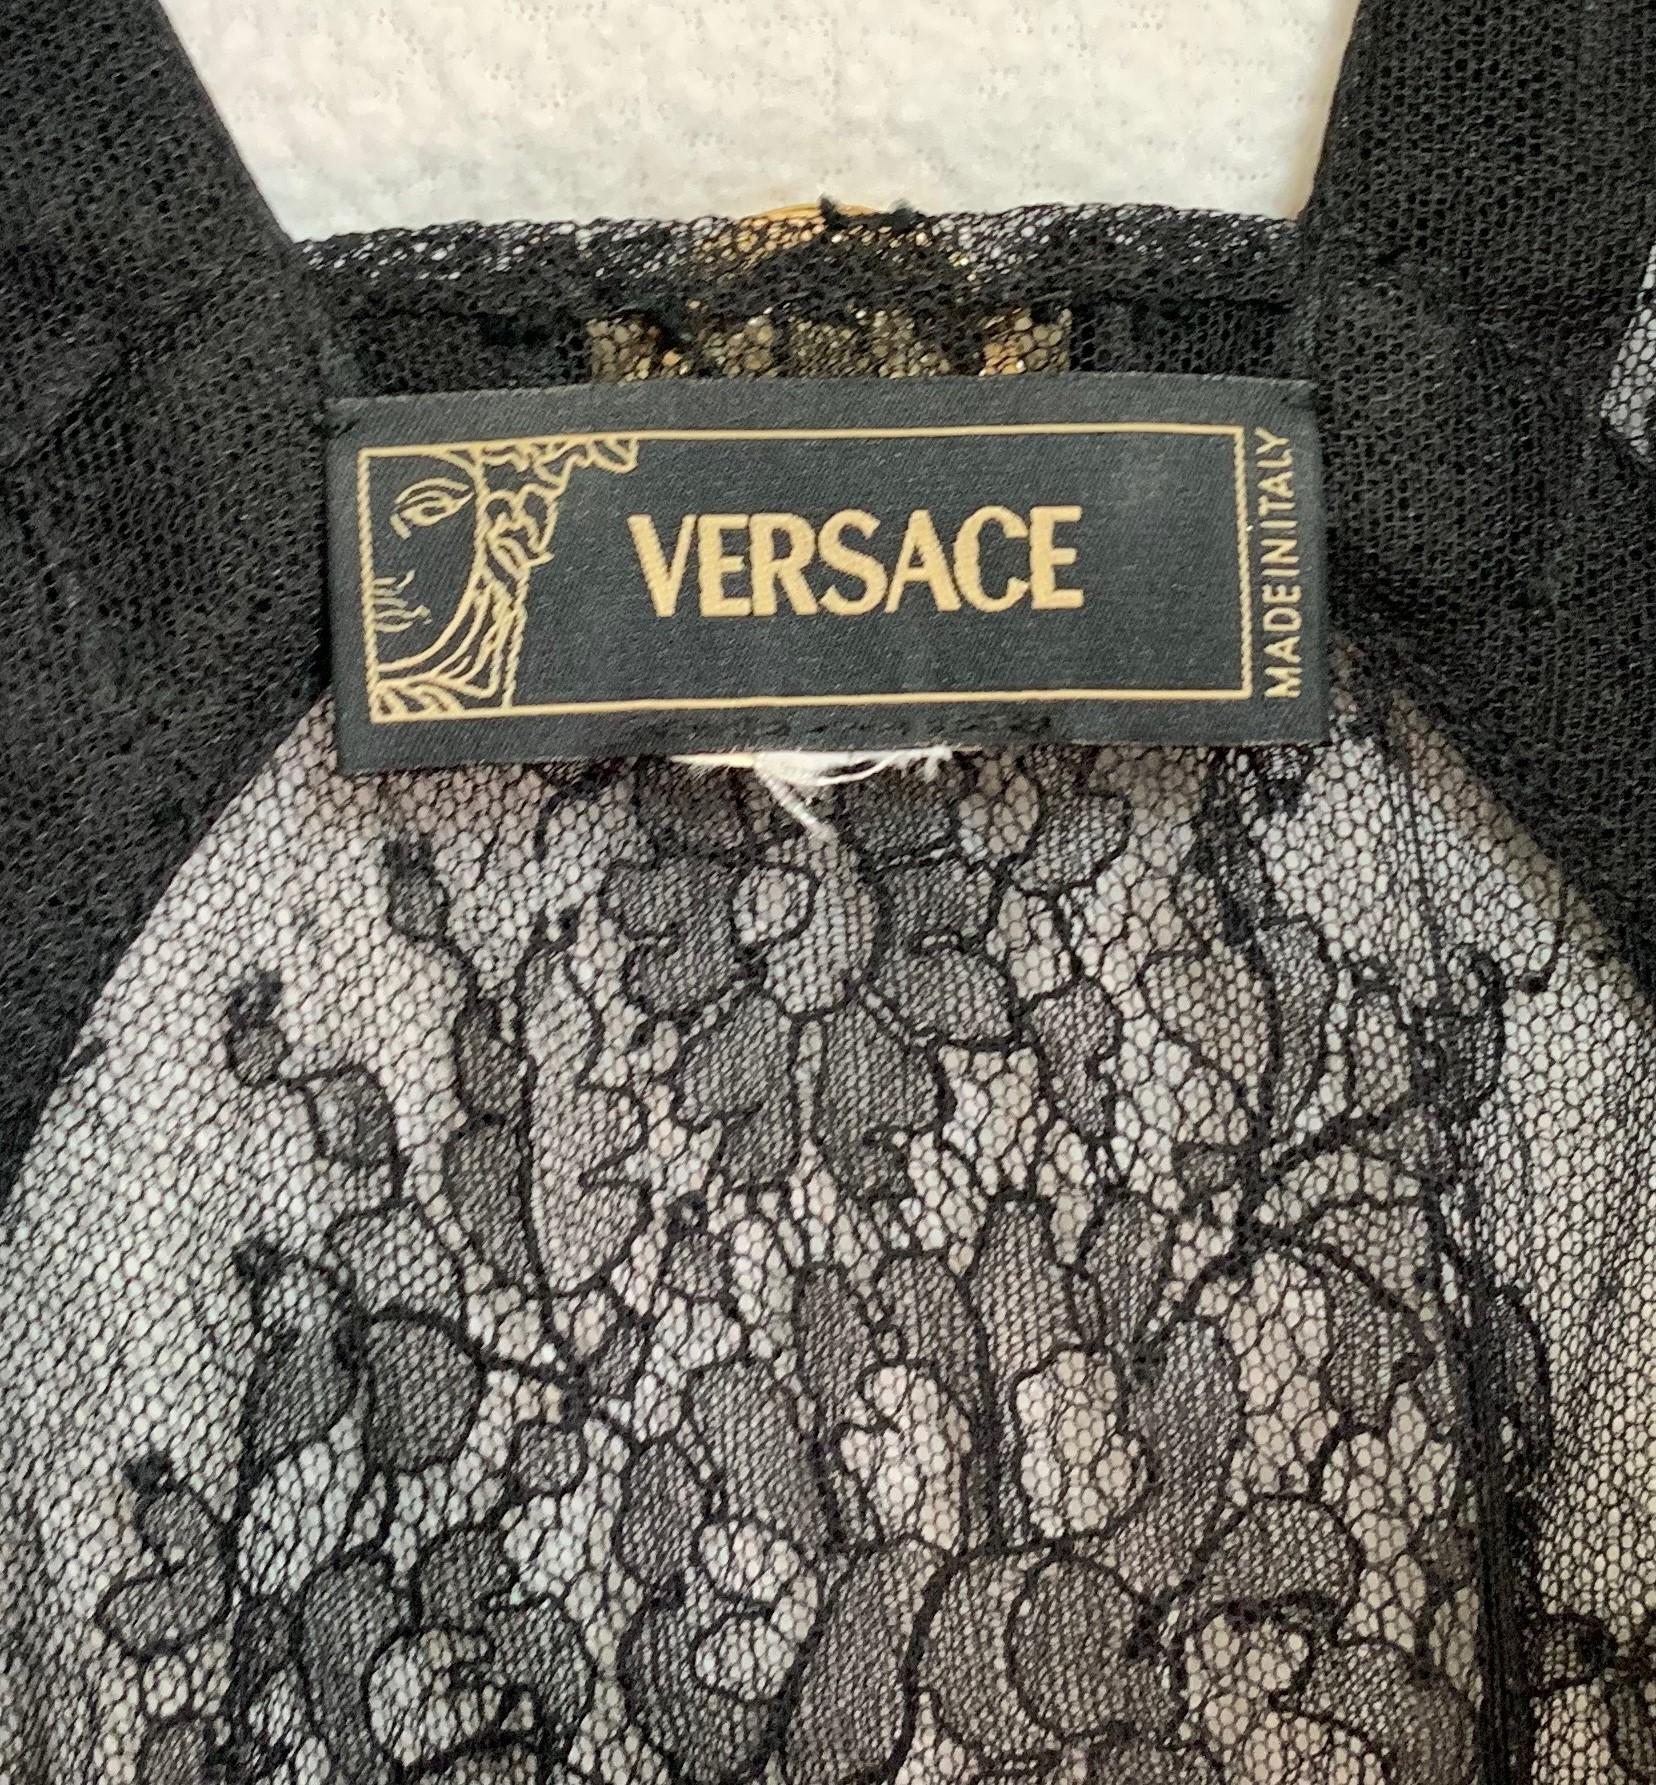 Women's F/W 2005 Versace Runway Plunging Sheer Black Lace Gown Dress